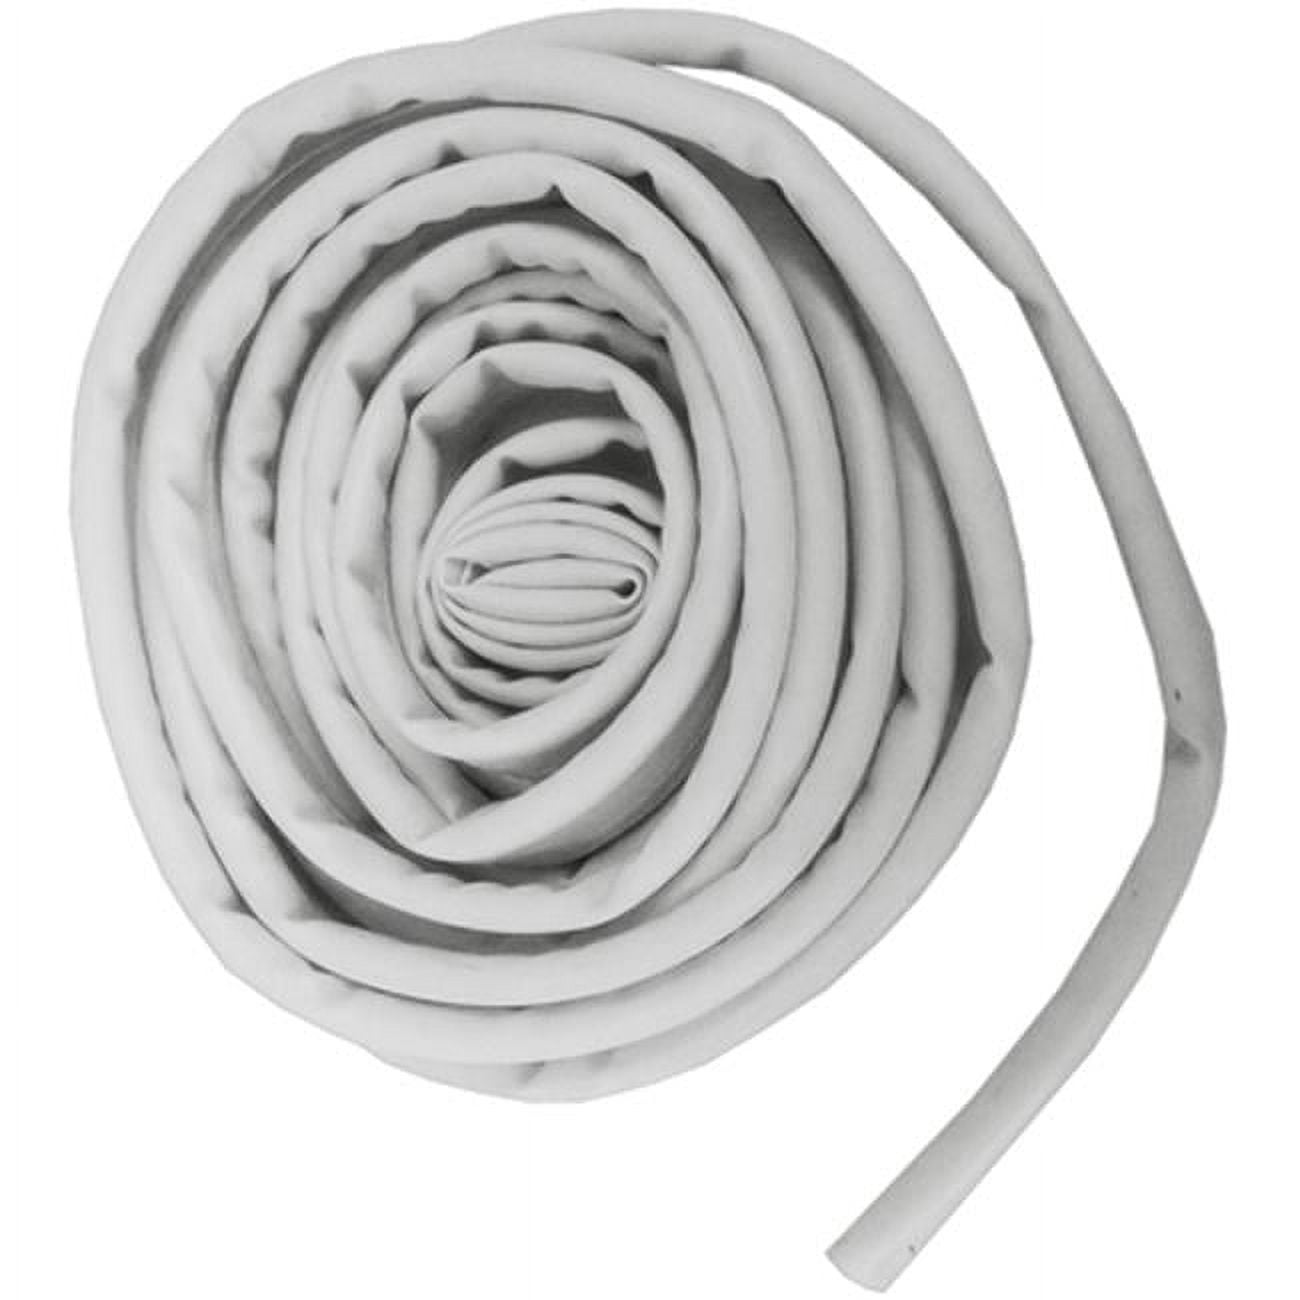 Thermwell 1700-17 17 Ft. X 0.87 In. Flange Foam, White